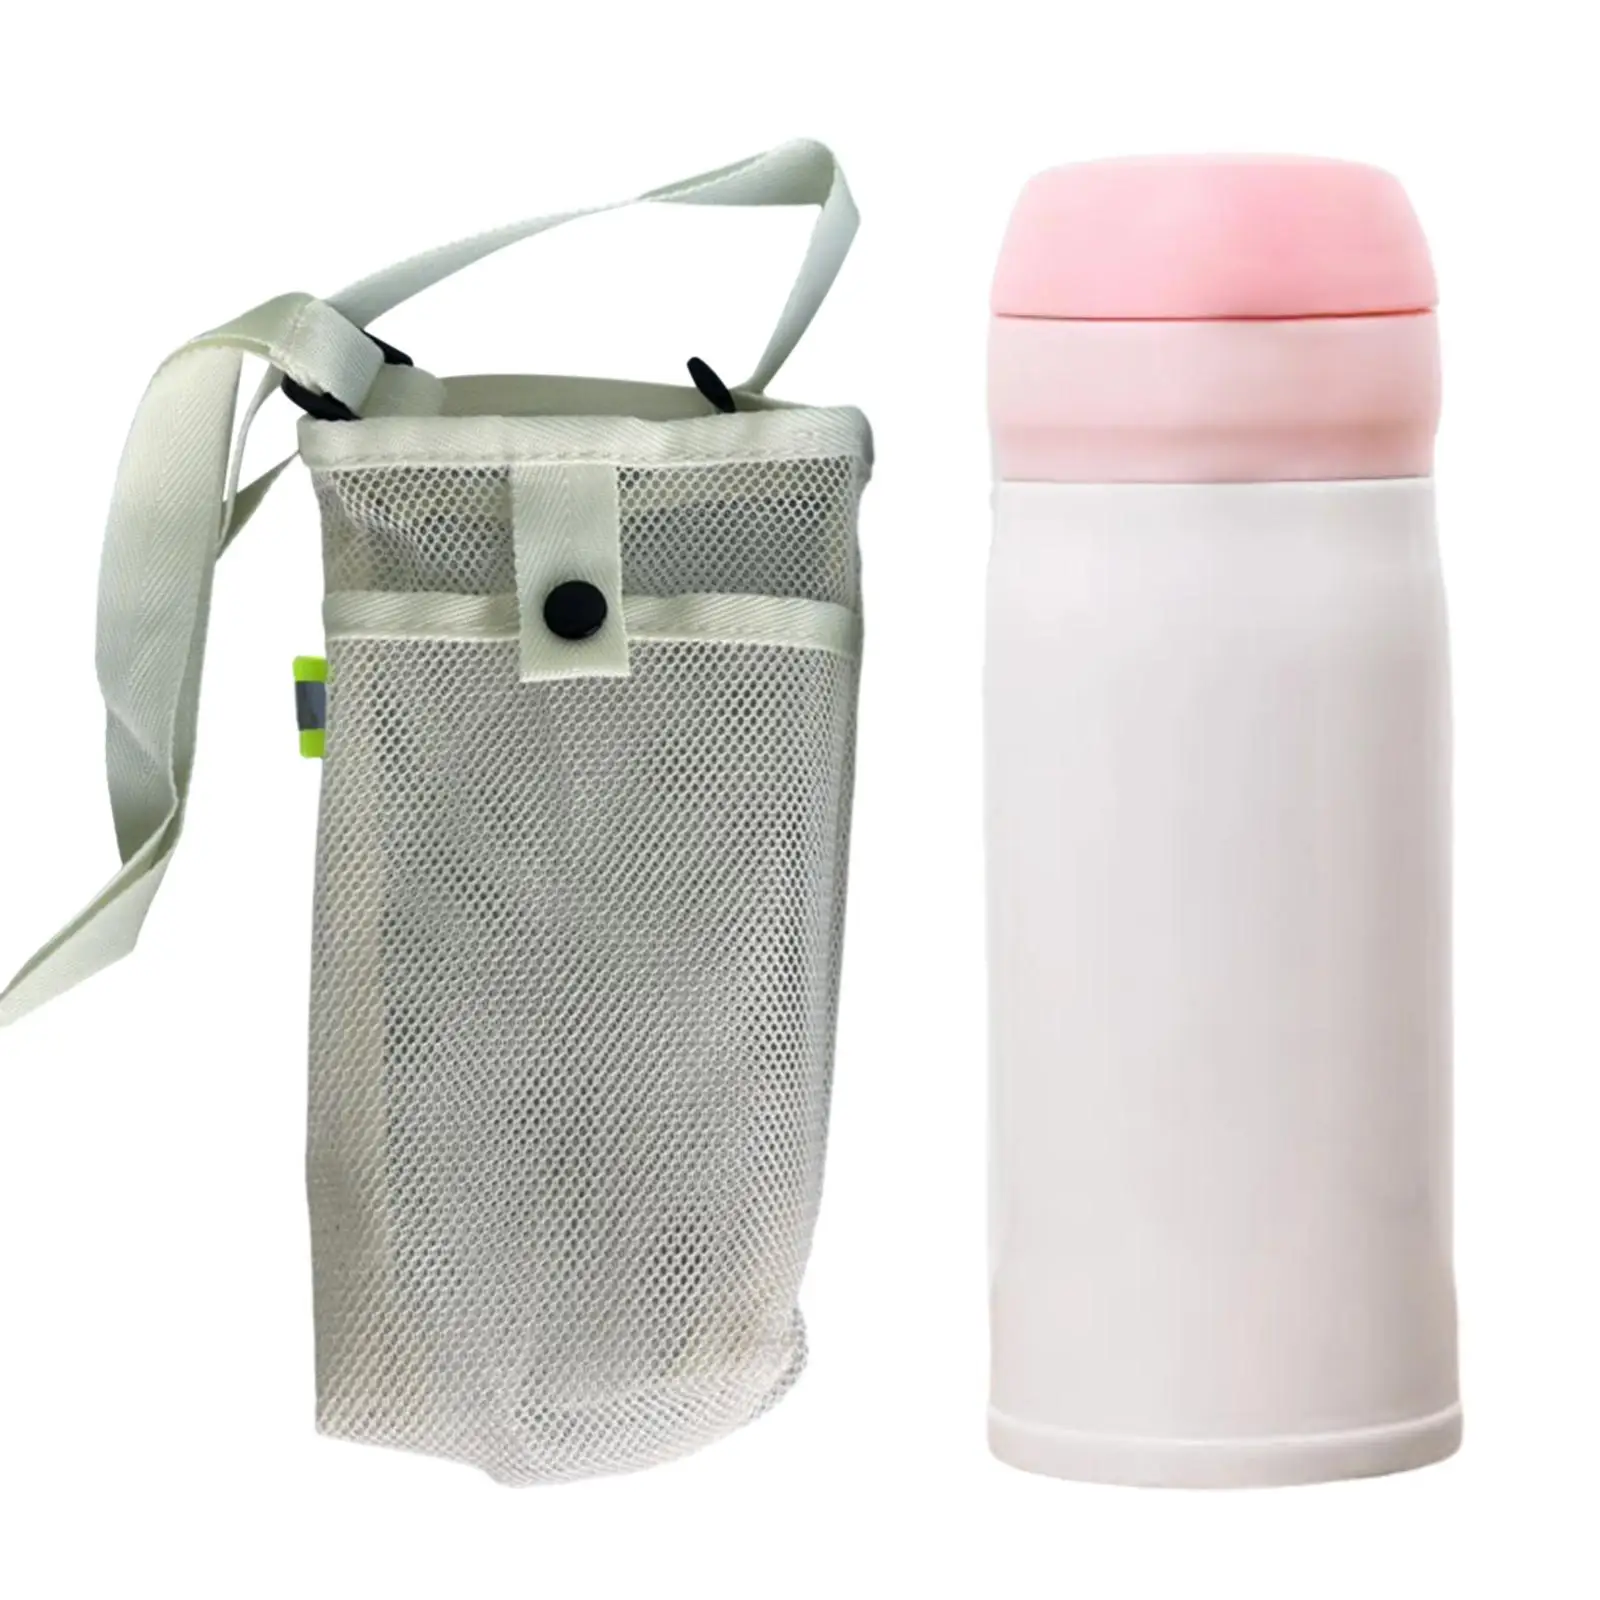 Mesh Water Bottle Holder Foldable Water Bottle Cover Water Bottle Pouch for Travel Backpacking Outdoor Activities Hiking Cycling